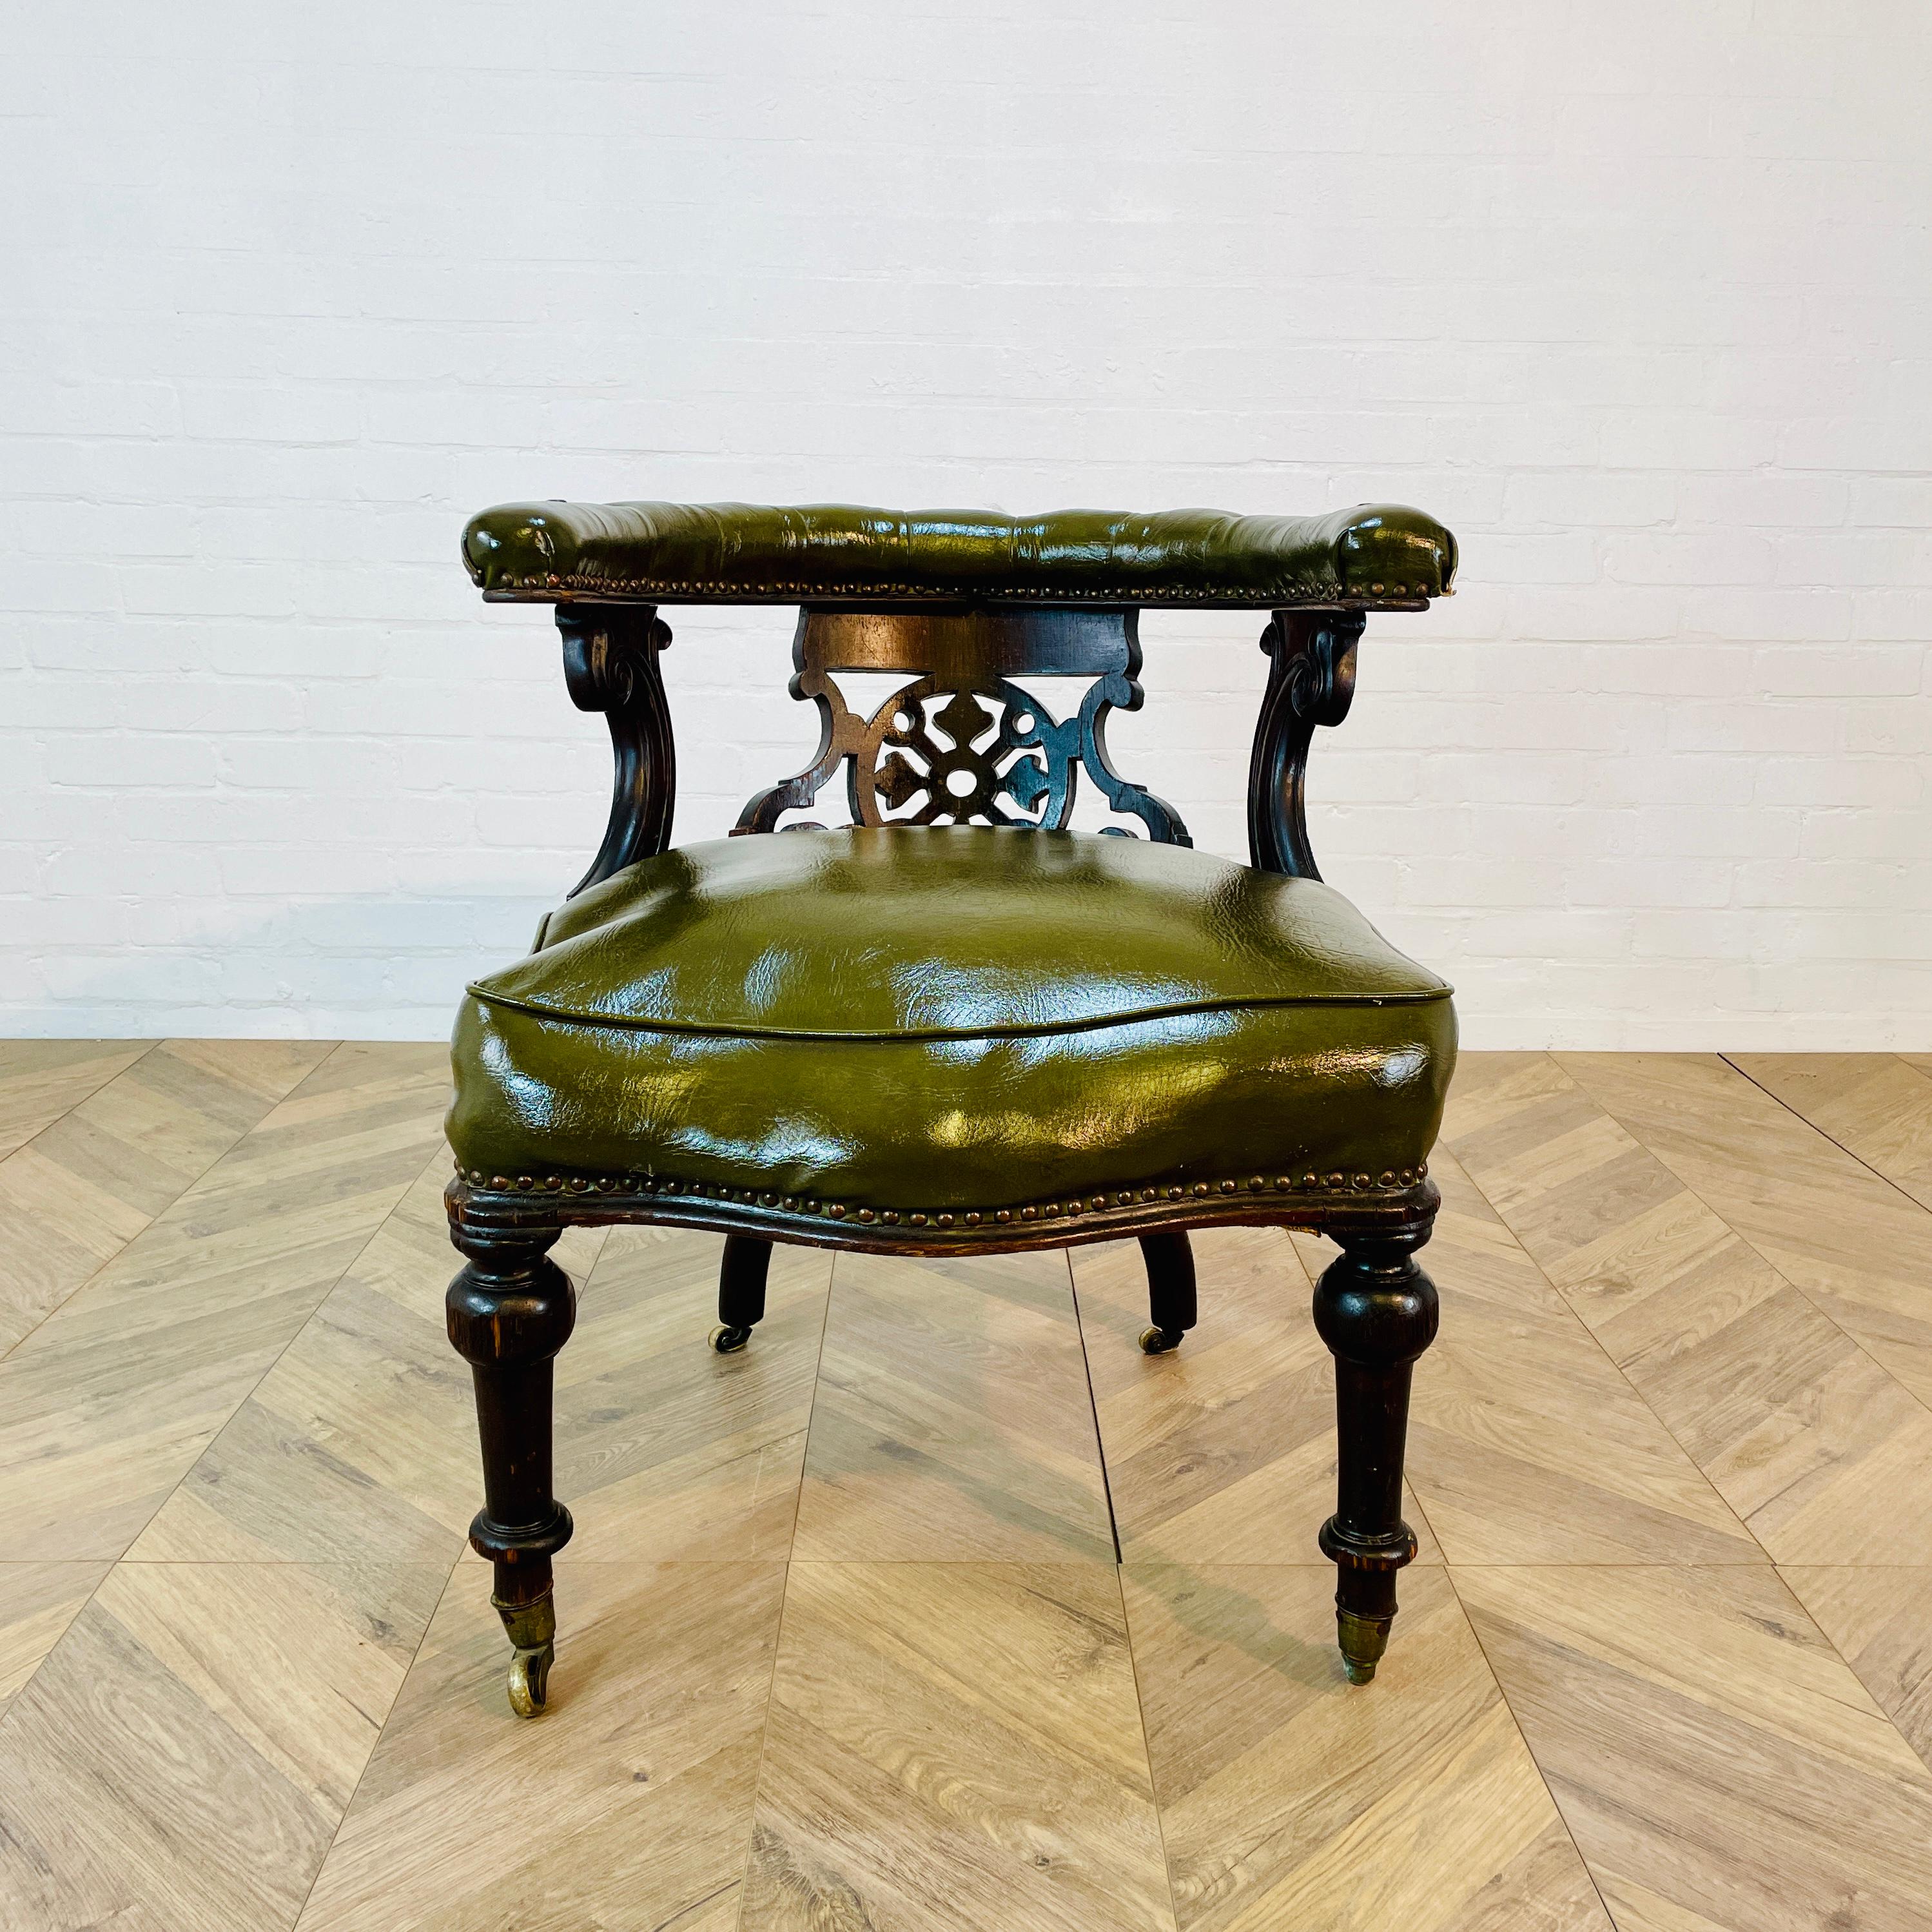 Antique English Green Leather Library Armchair on Castors, 19th Century For Sale 6